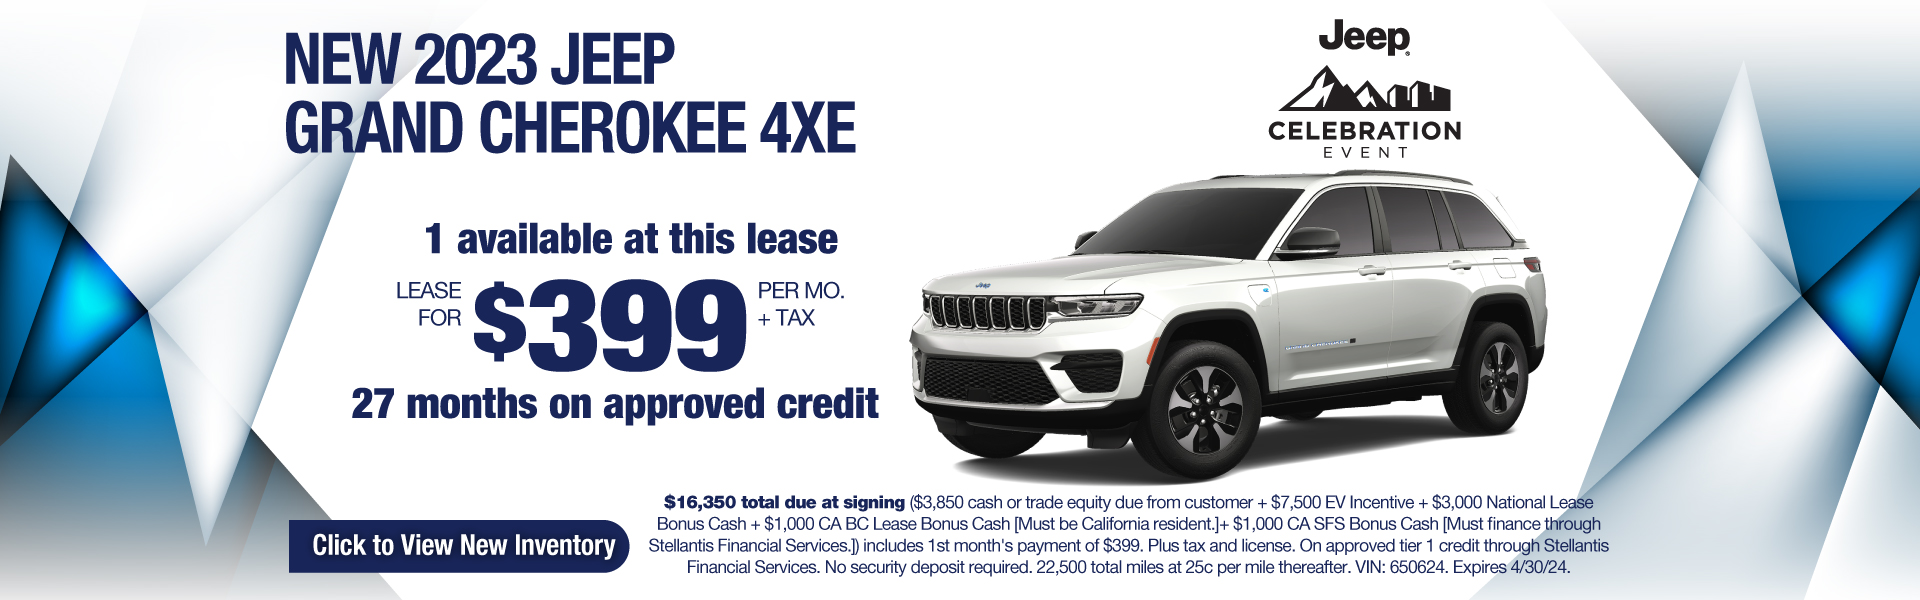 Lease a New 2023 Jeep Grand Cherokee 4xe for $399 per month plus tax! Expires 4/30/24.